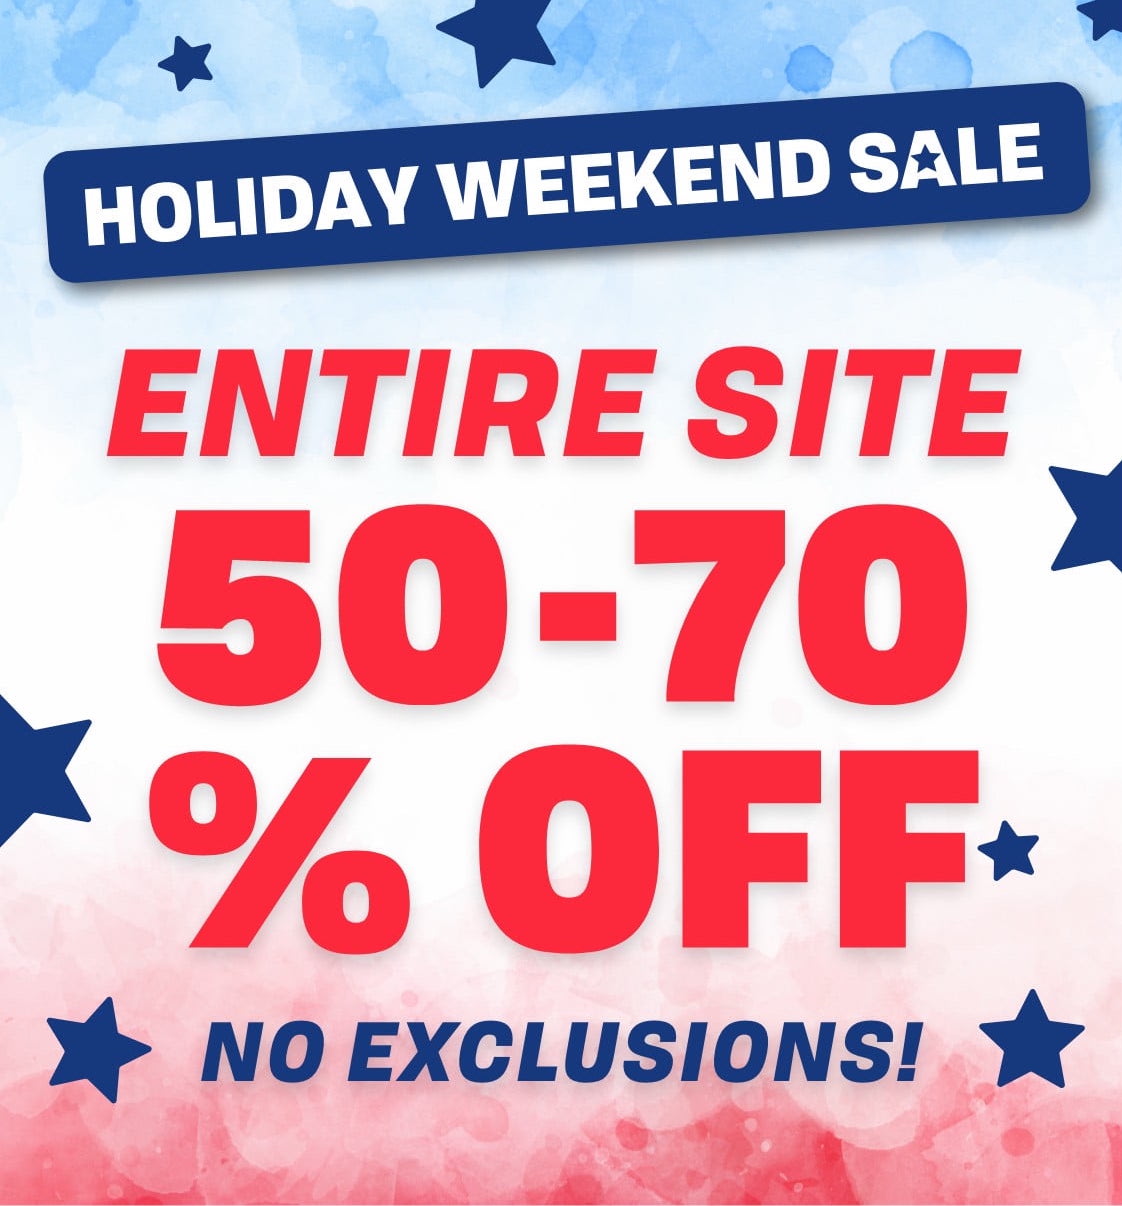 HOLIDAY WEEKEND SALE ENTIRE SITE 50-70% OFF | NO EXCLUSIONS!